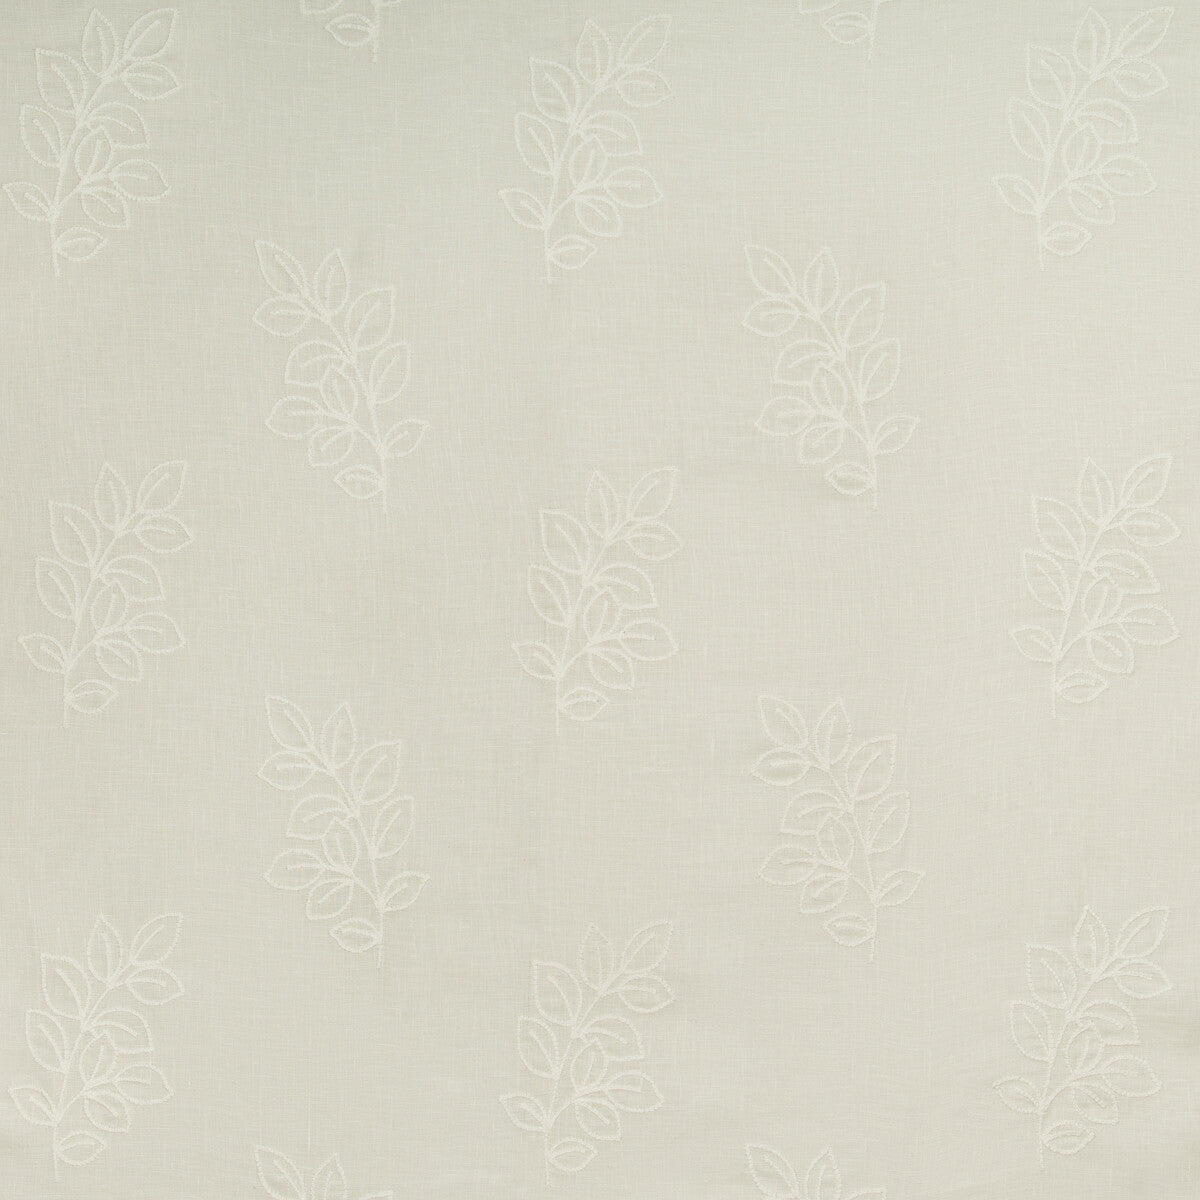 Leafstich fabric in ivory color - pattern 4634.1.0 - by Kravet Basics in the Bermuda collection